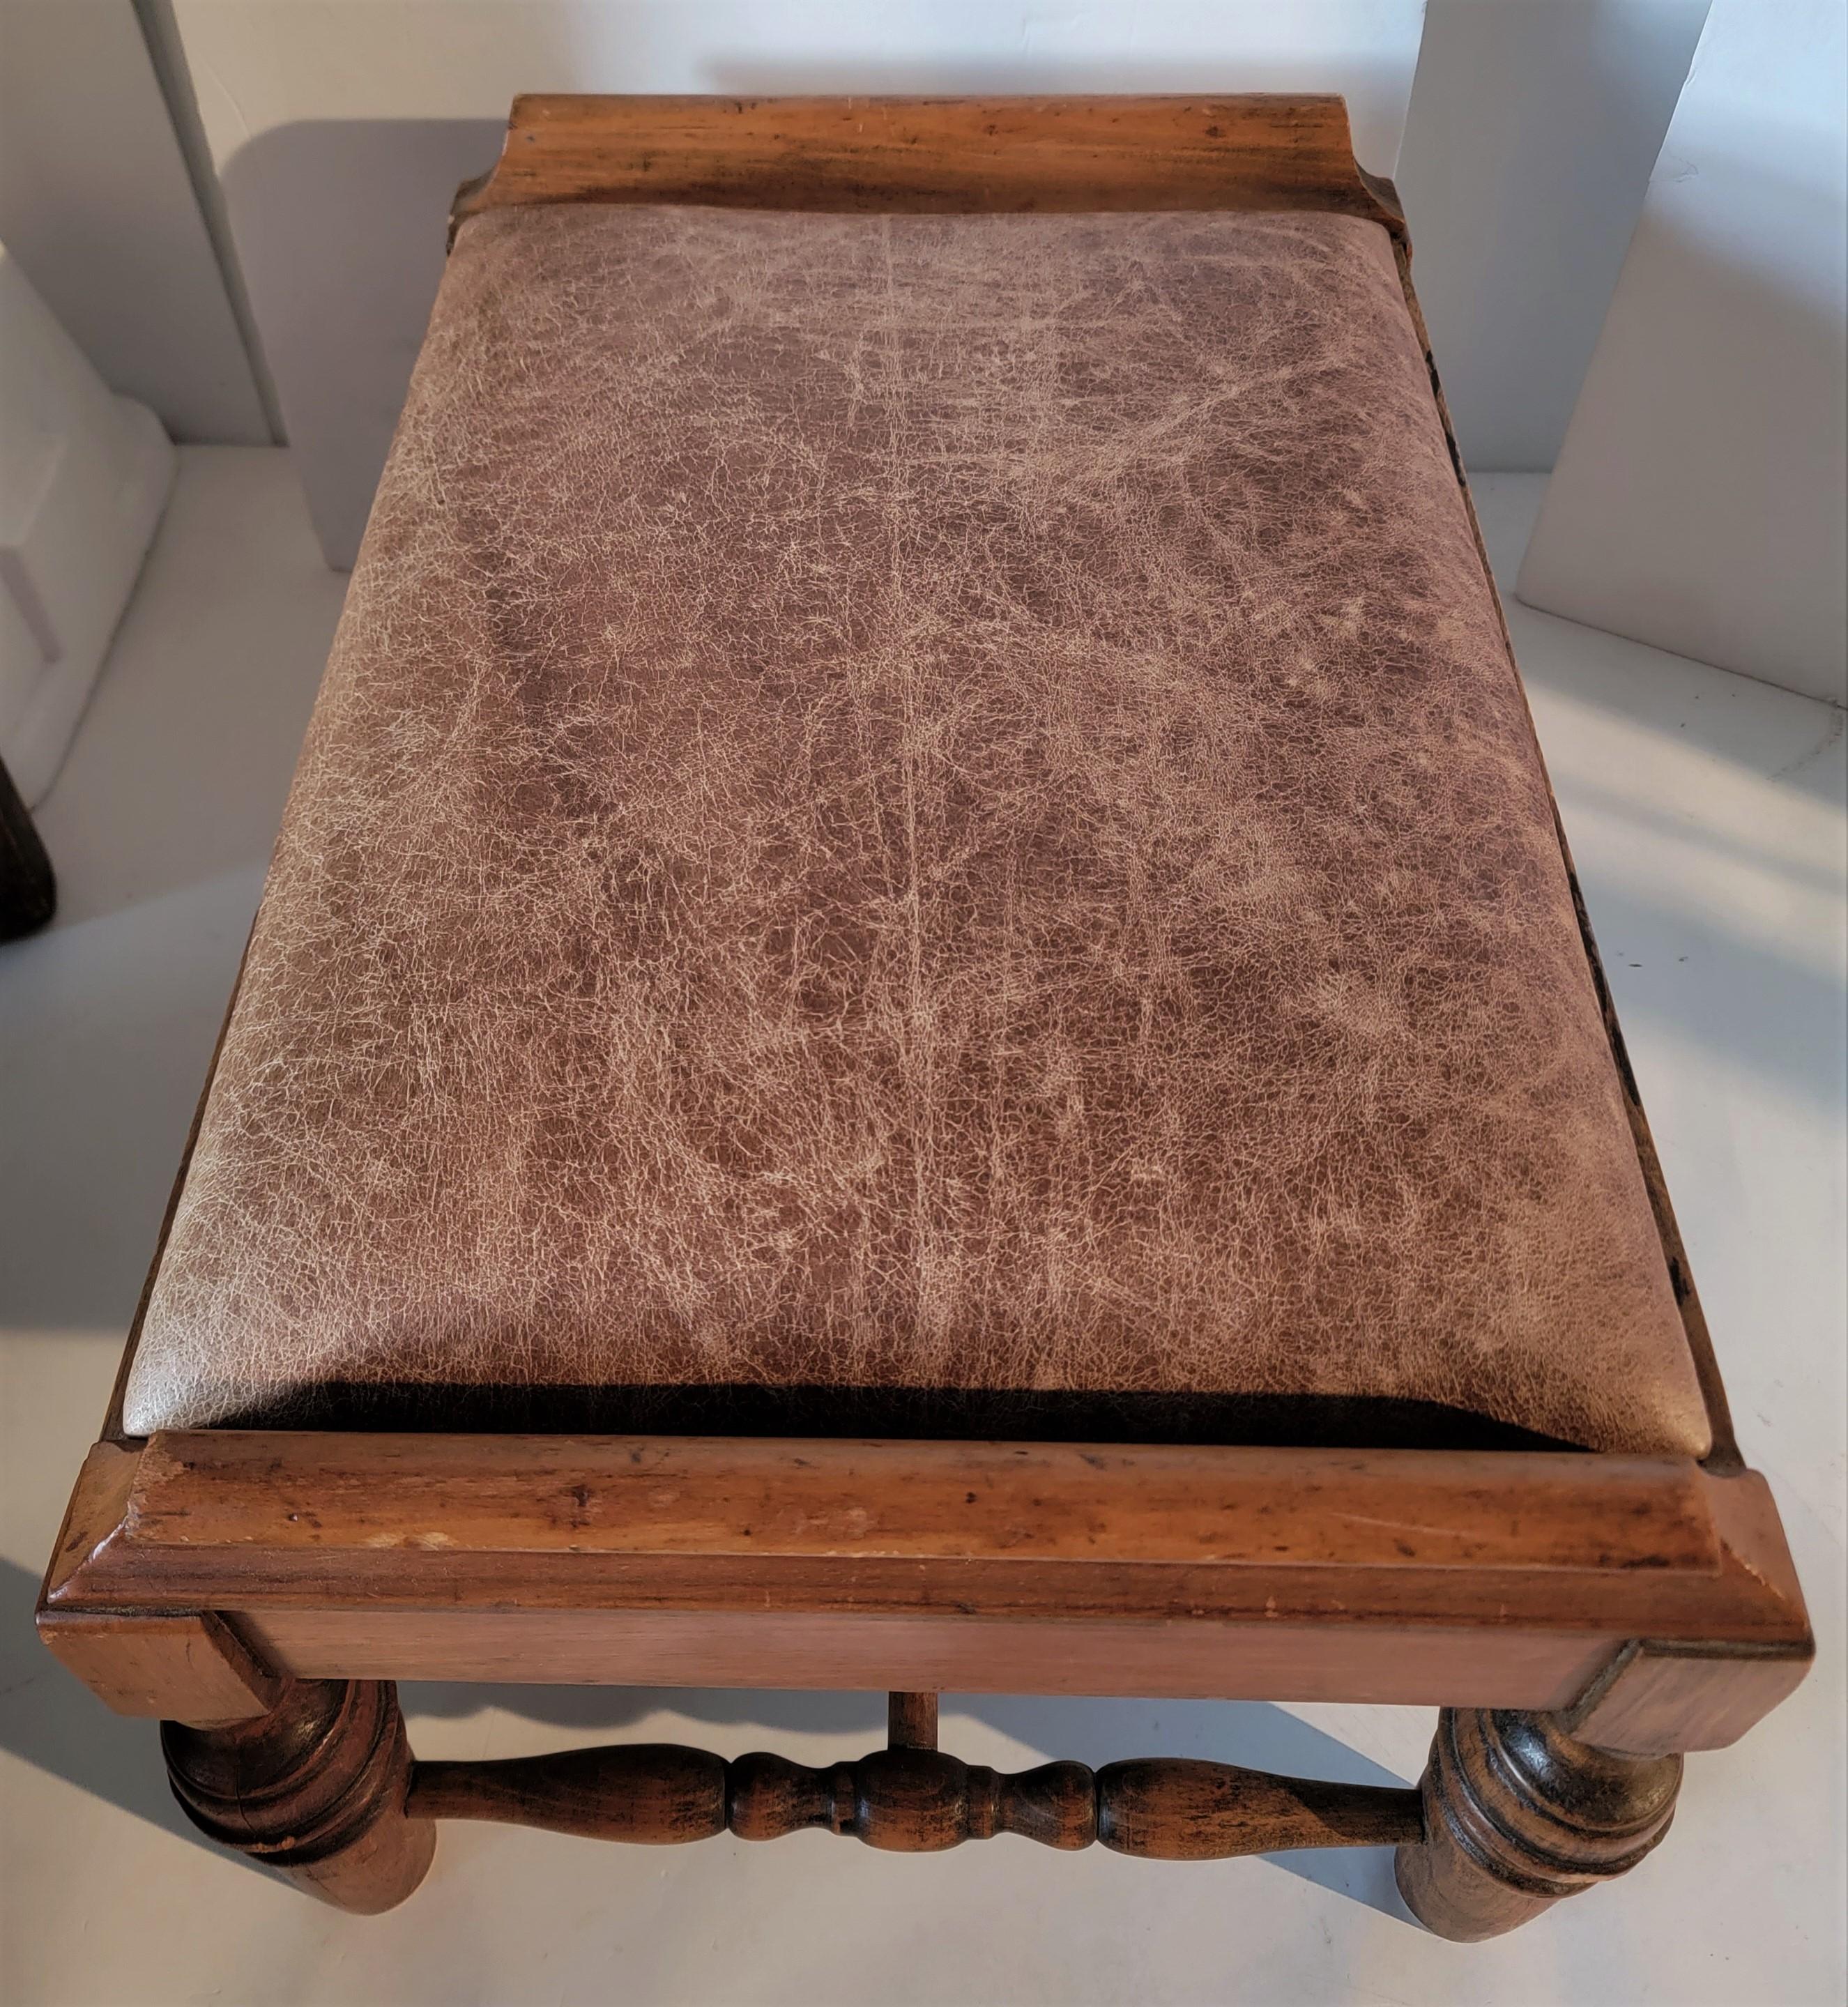 Early 20th C Ottoman Upholstered in a Distressed Leather In Good Condition For Sale In Los Angeles, CA